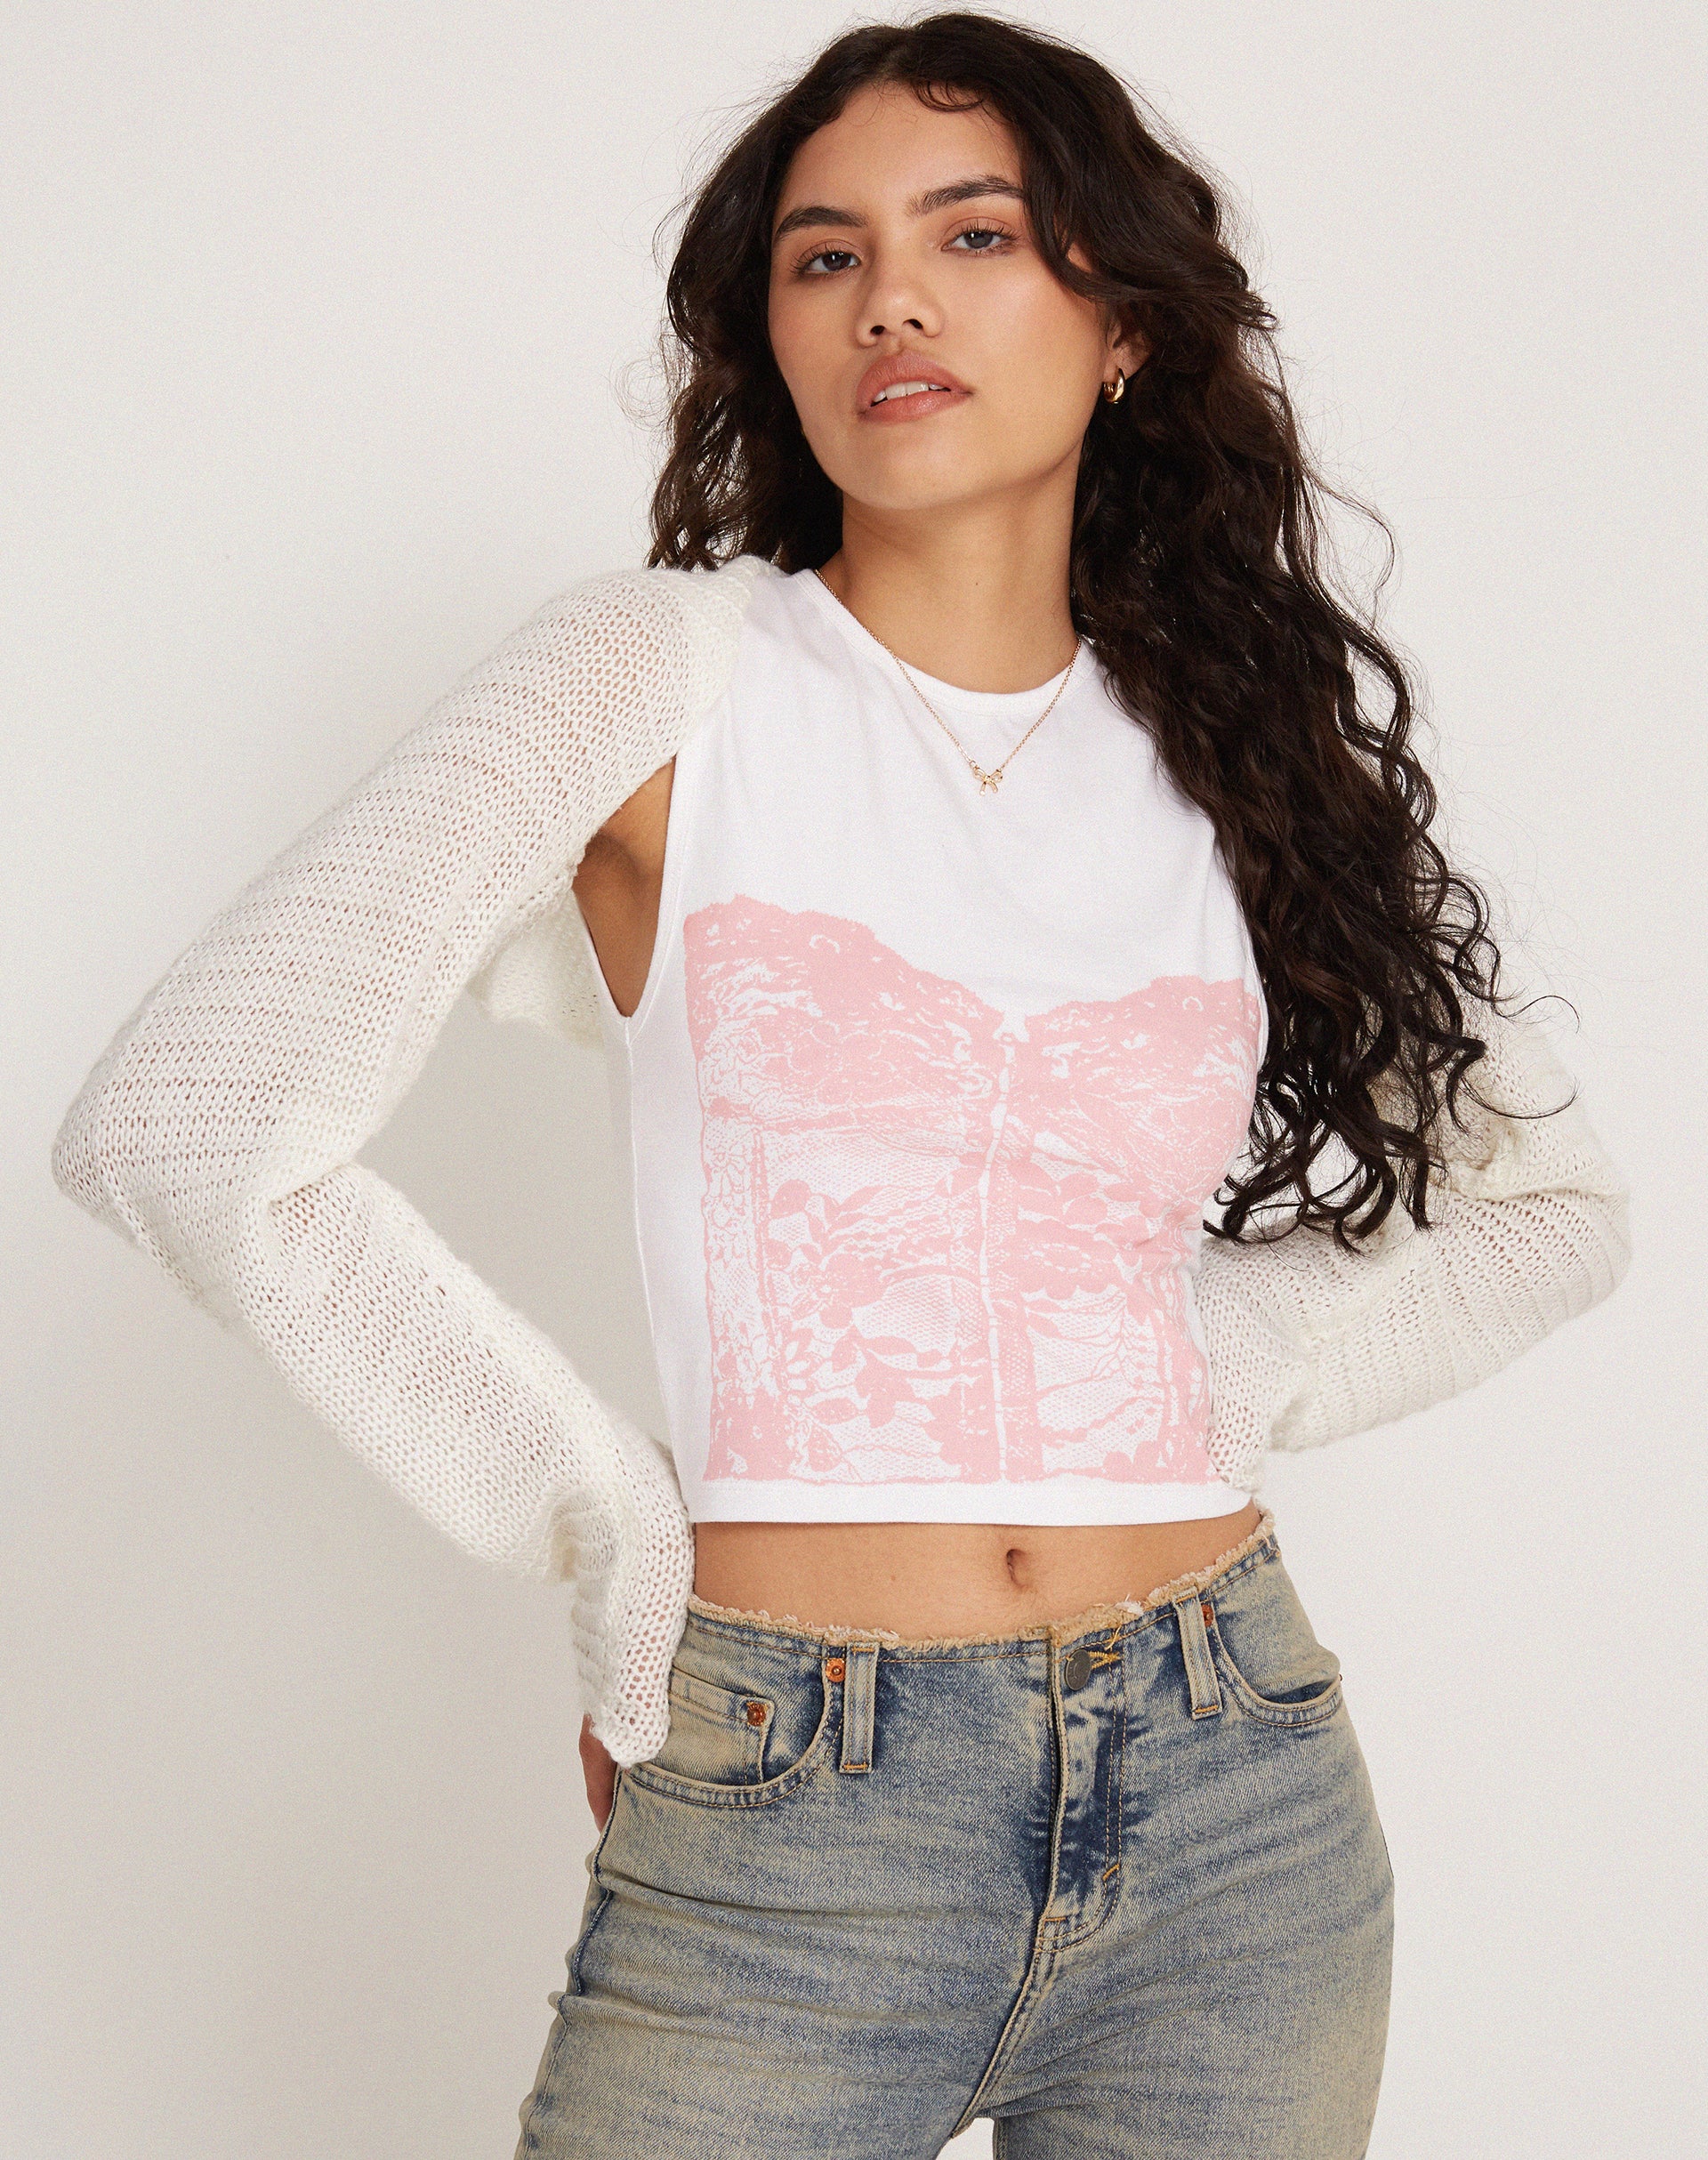 Image of Monlo Vest Top in White Pink Corset Print